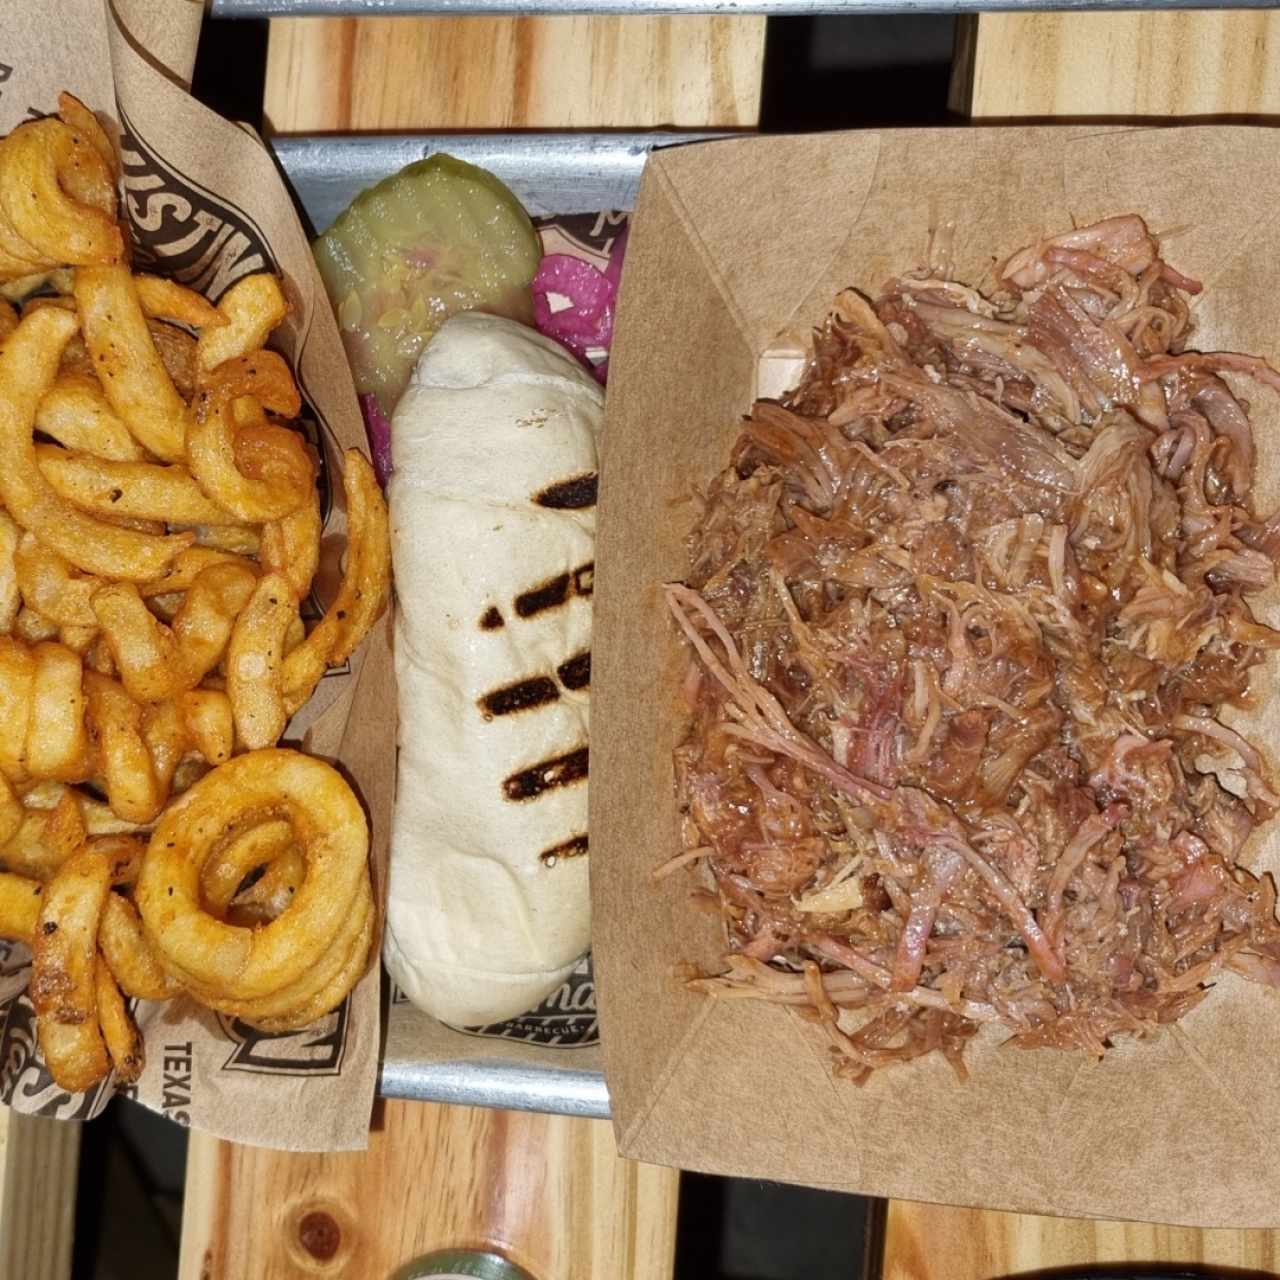 Smoked Meats - Pulled Pork